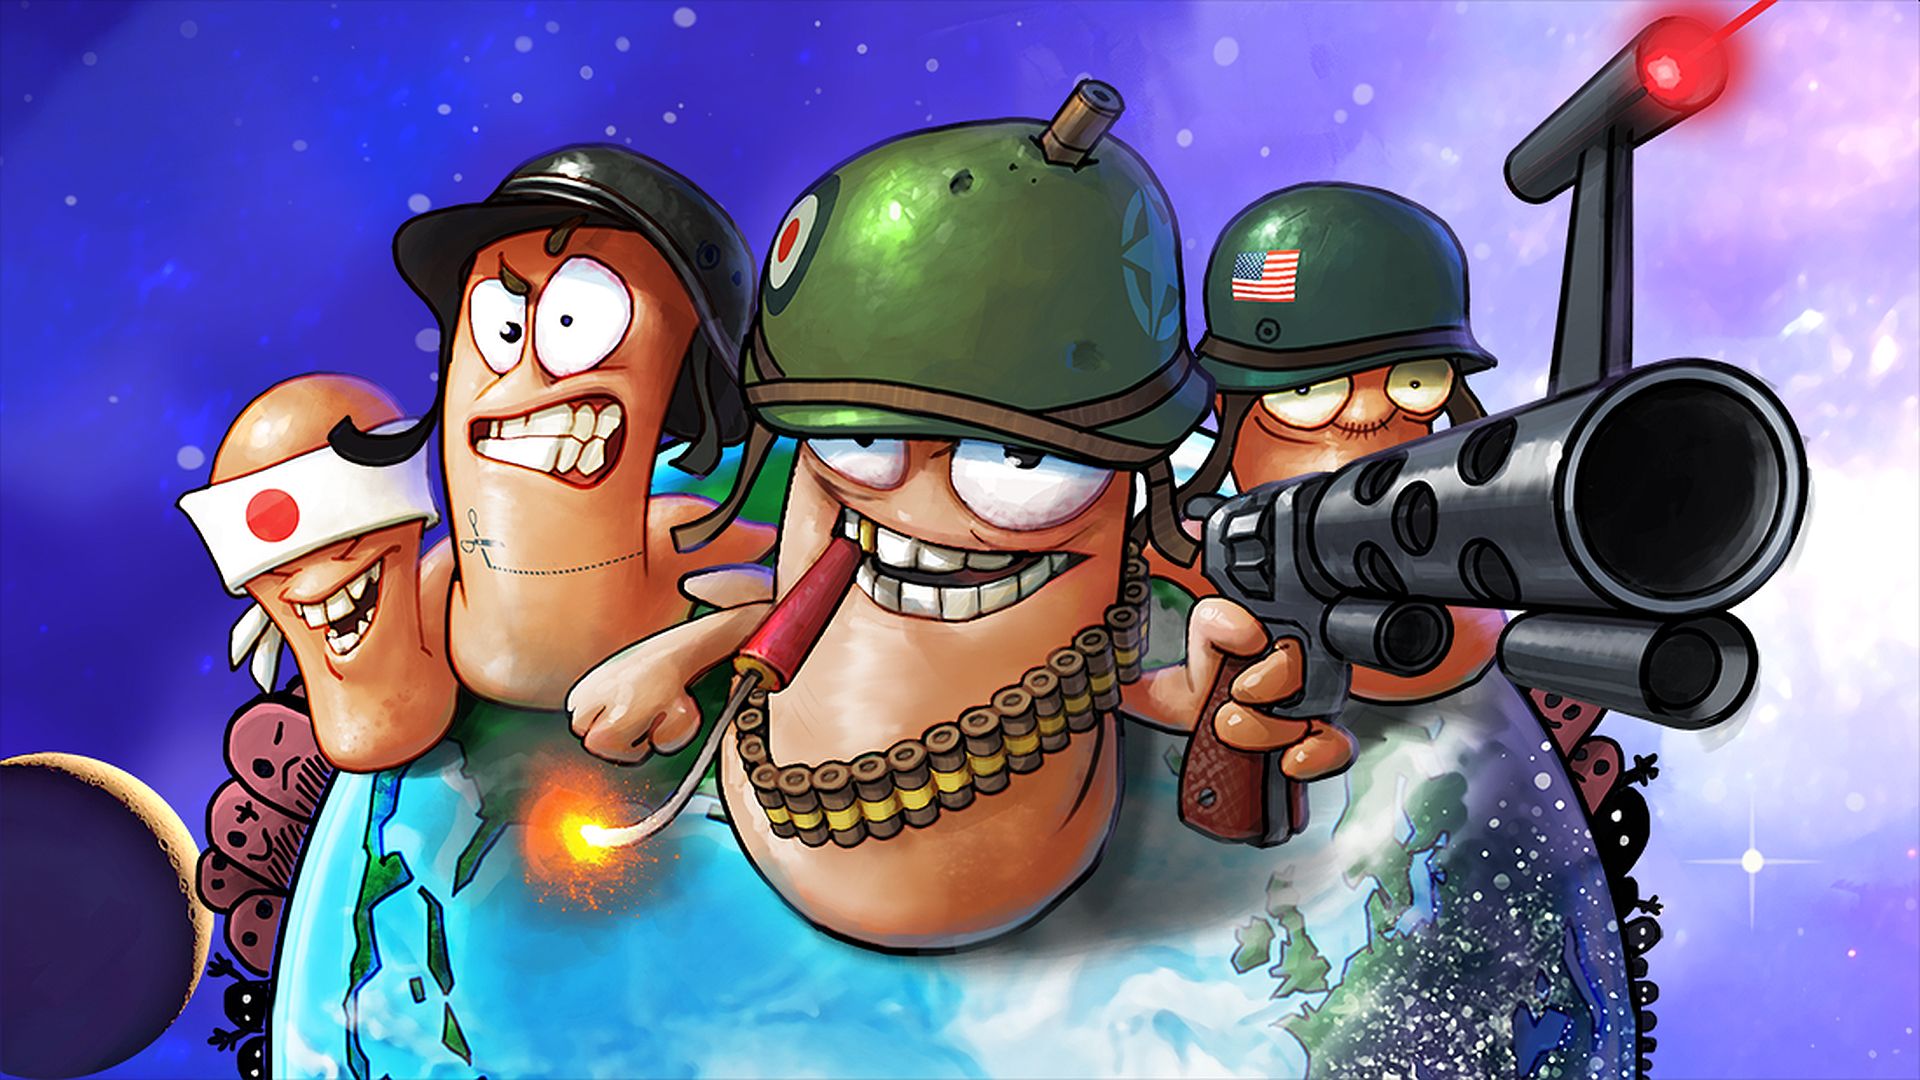 worms shooting game